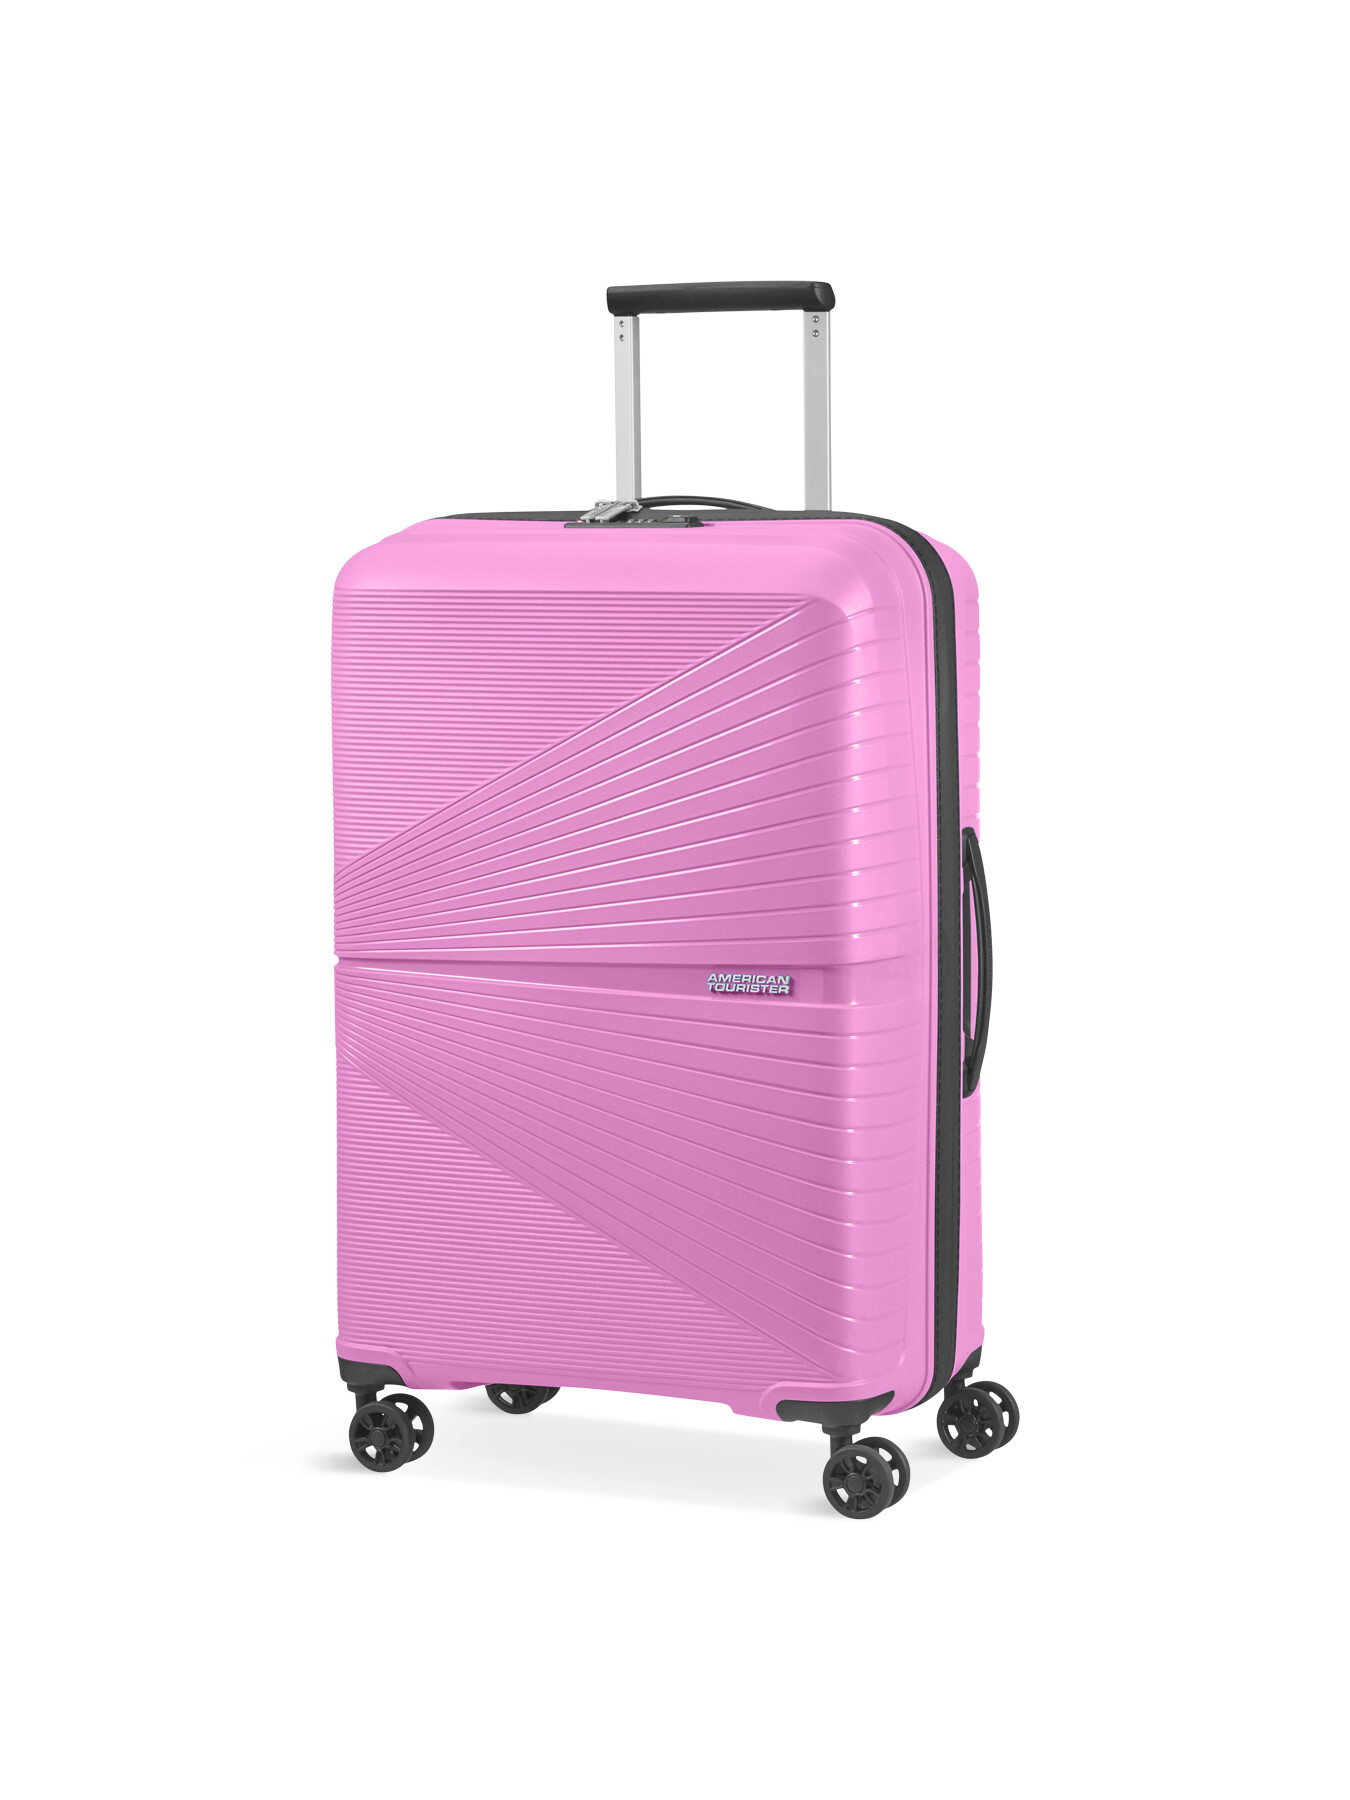 American Tourister American Tourister Airconic Spinner 67cm Suitcase, Pink  Lemonade | Fenwick